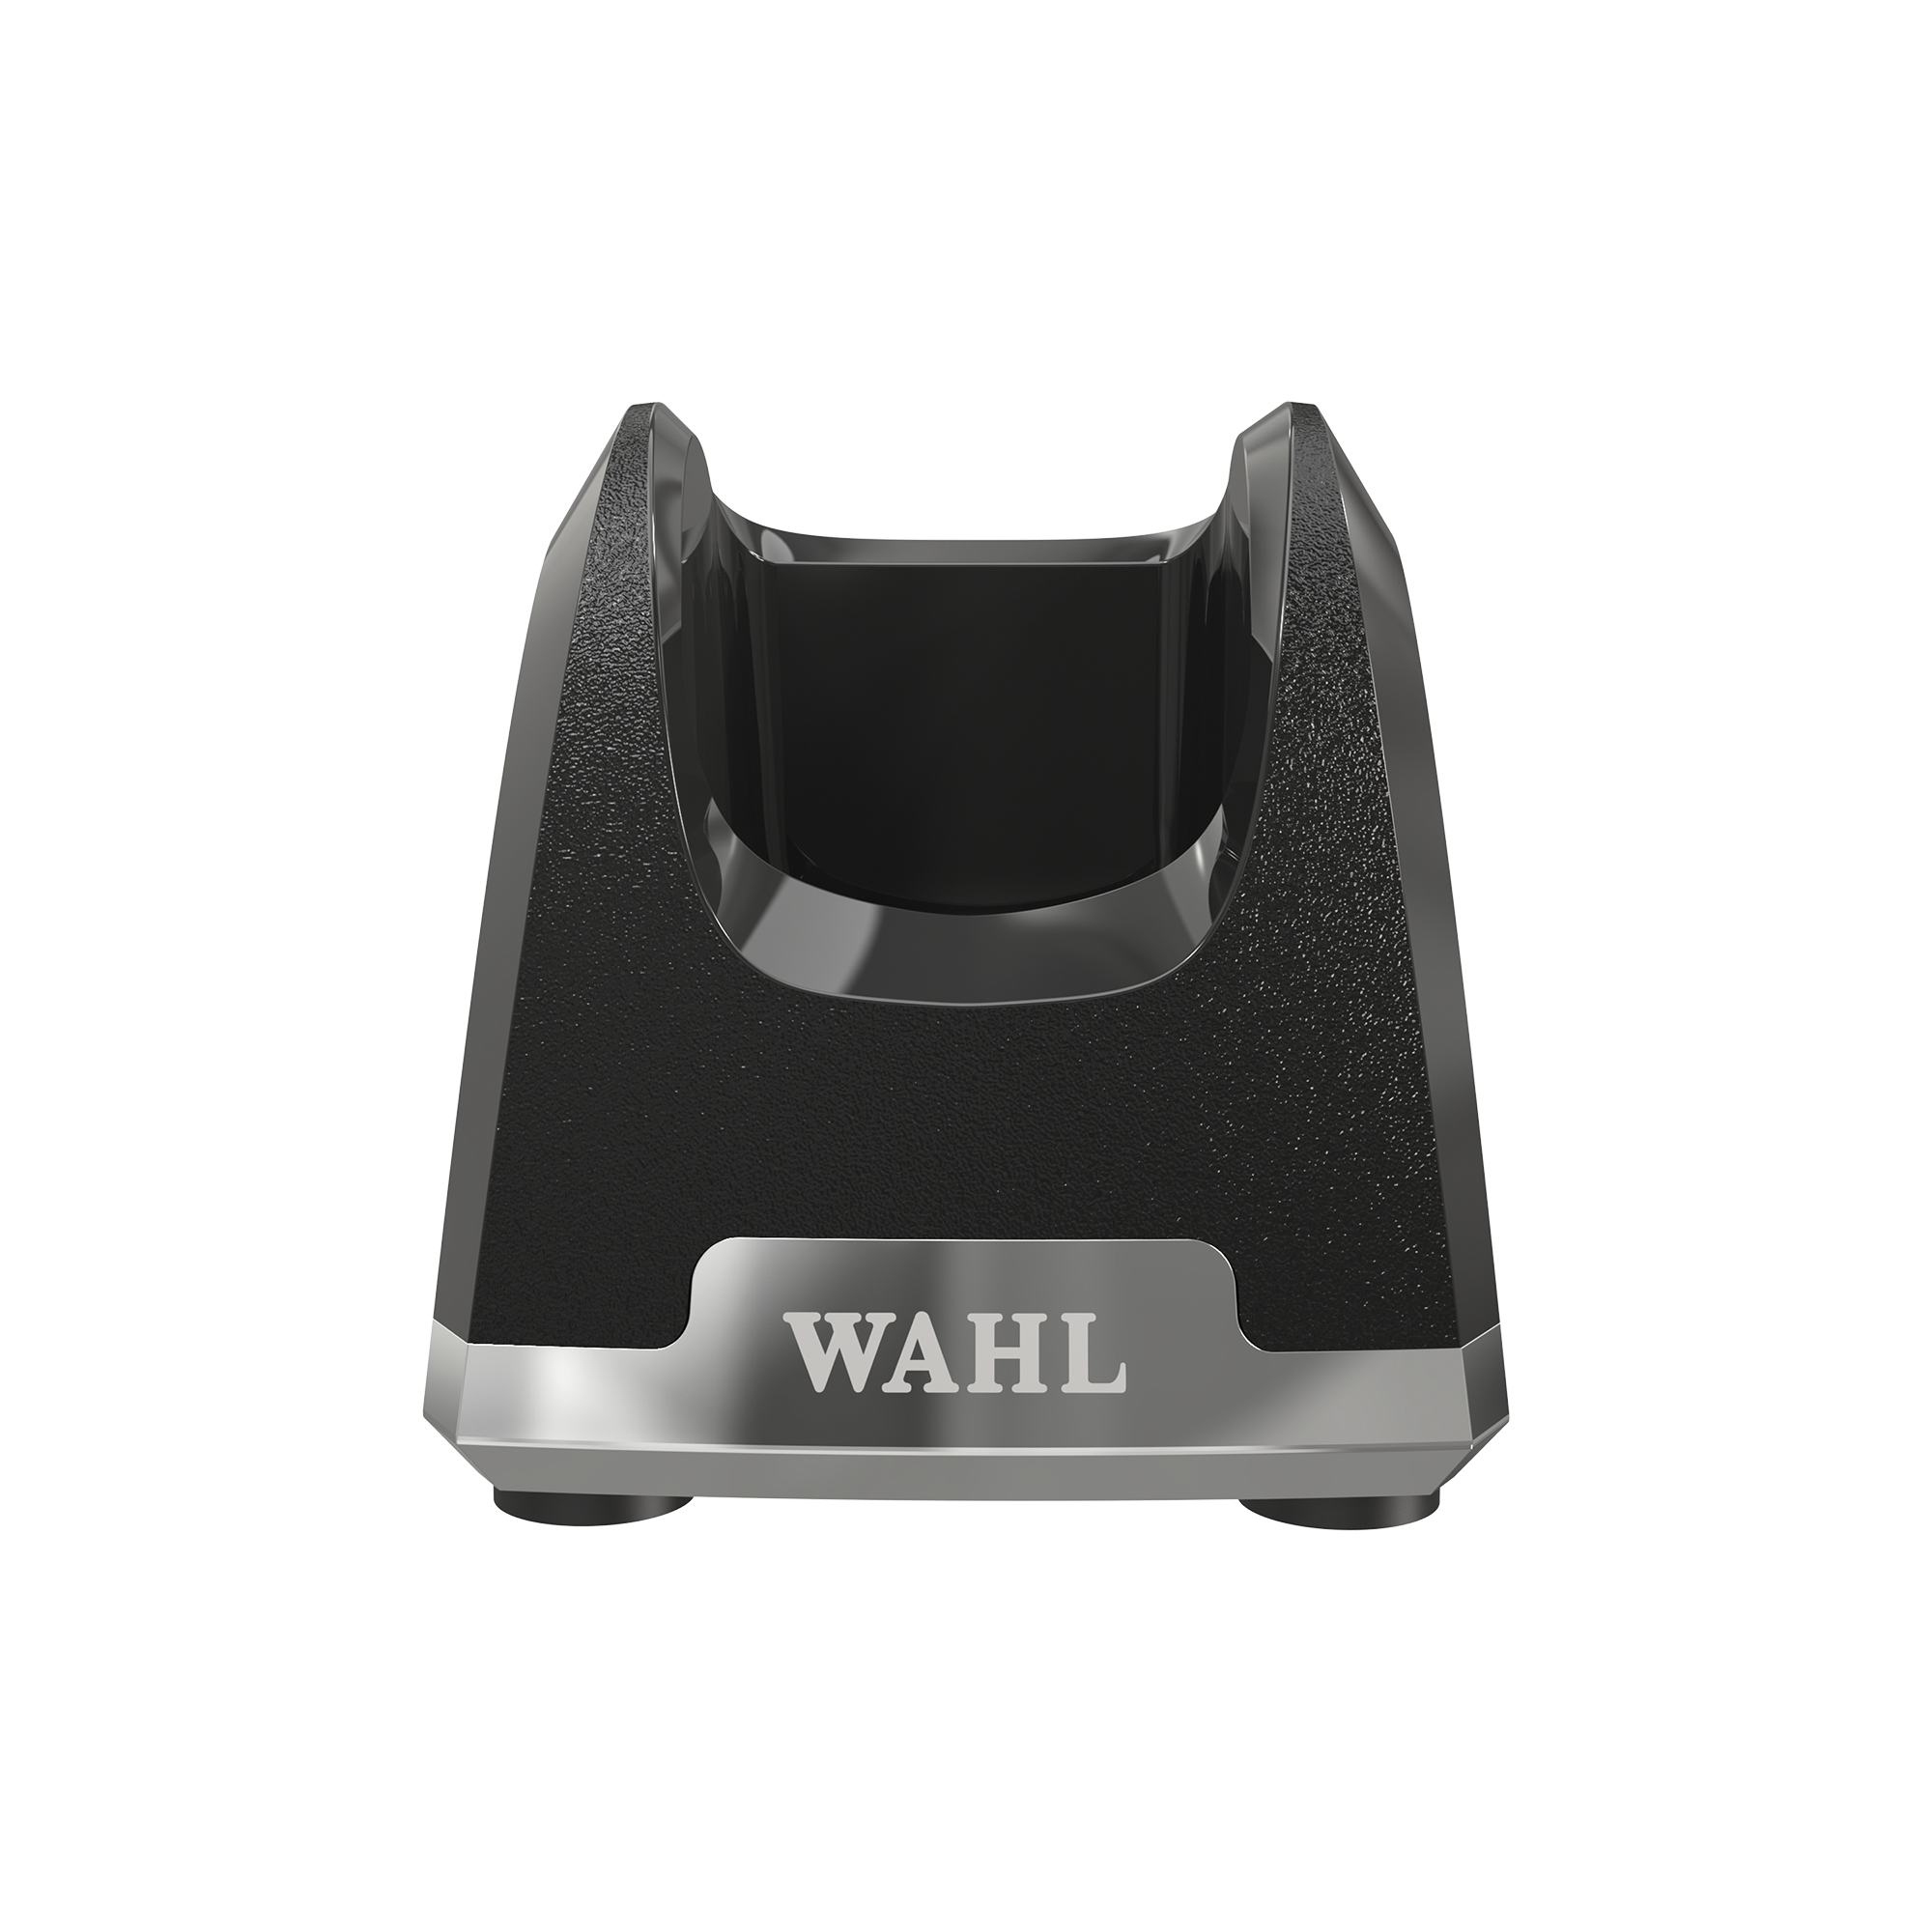 Wahl Cordless Clipper Charge Stand